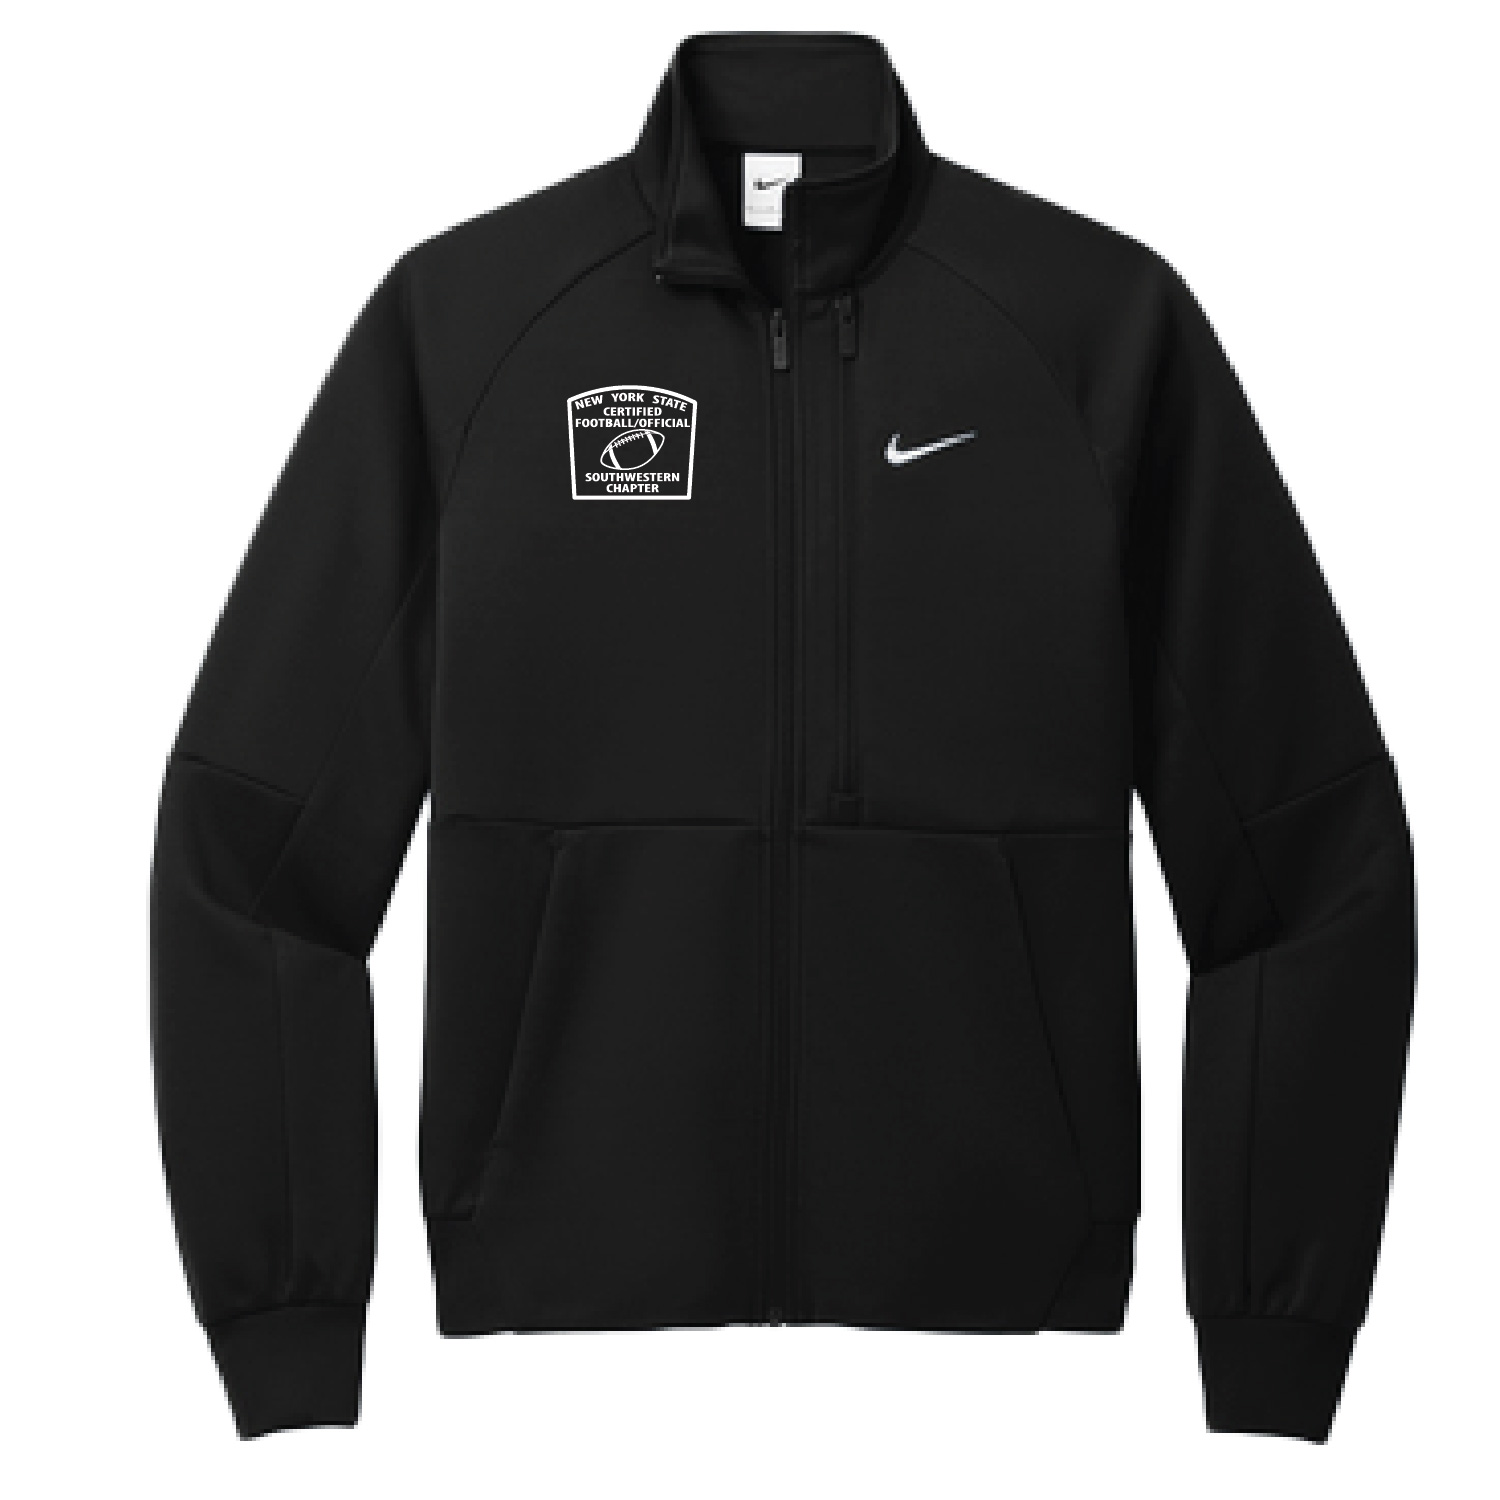 NYS Certified Football Official Apparel- Nike Full-Zip Chest Swoosh Jacket- Emb. product image